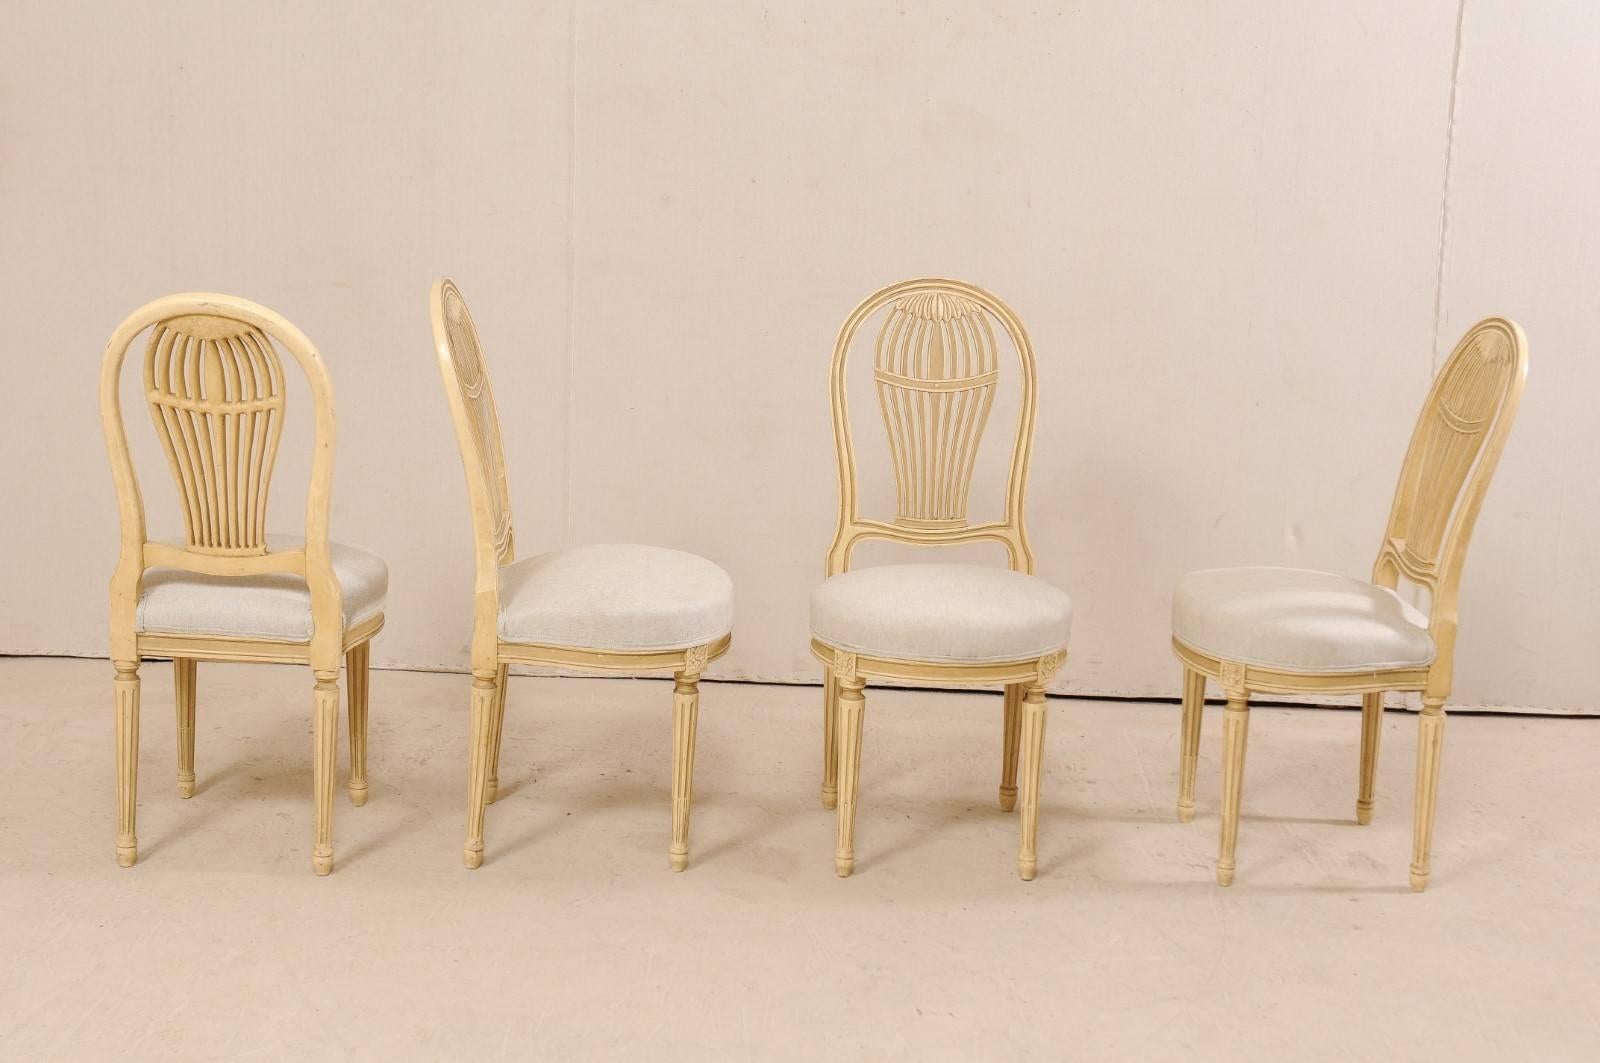 Set of Four French Louis XVI Style Painted Wood Balloon-Back Chairs im Zustand „Gut“ in Atlanta, GA